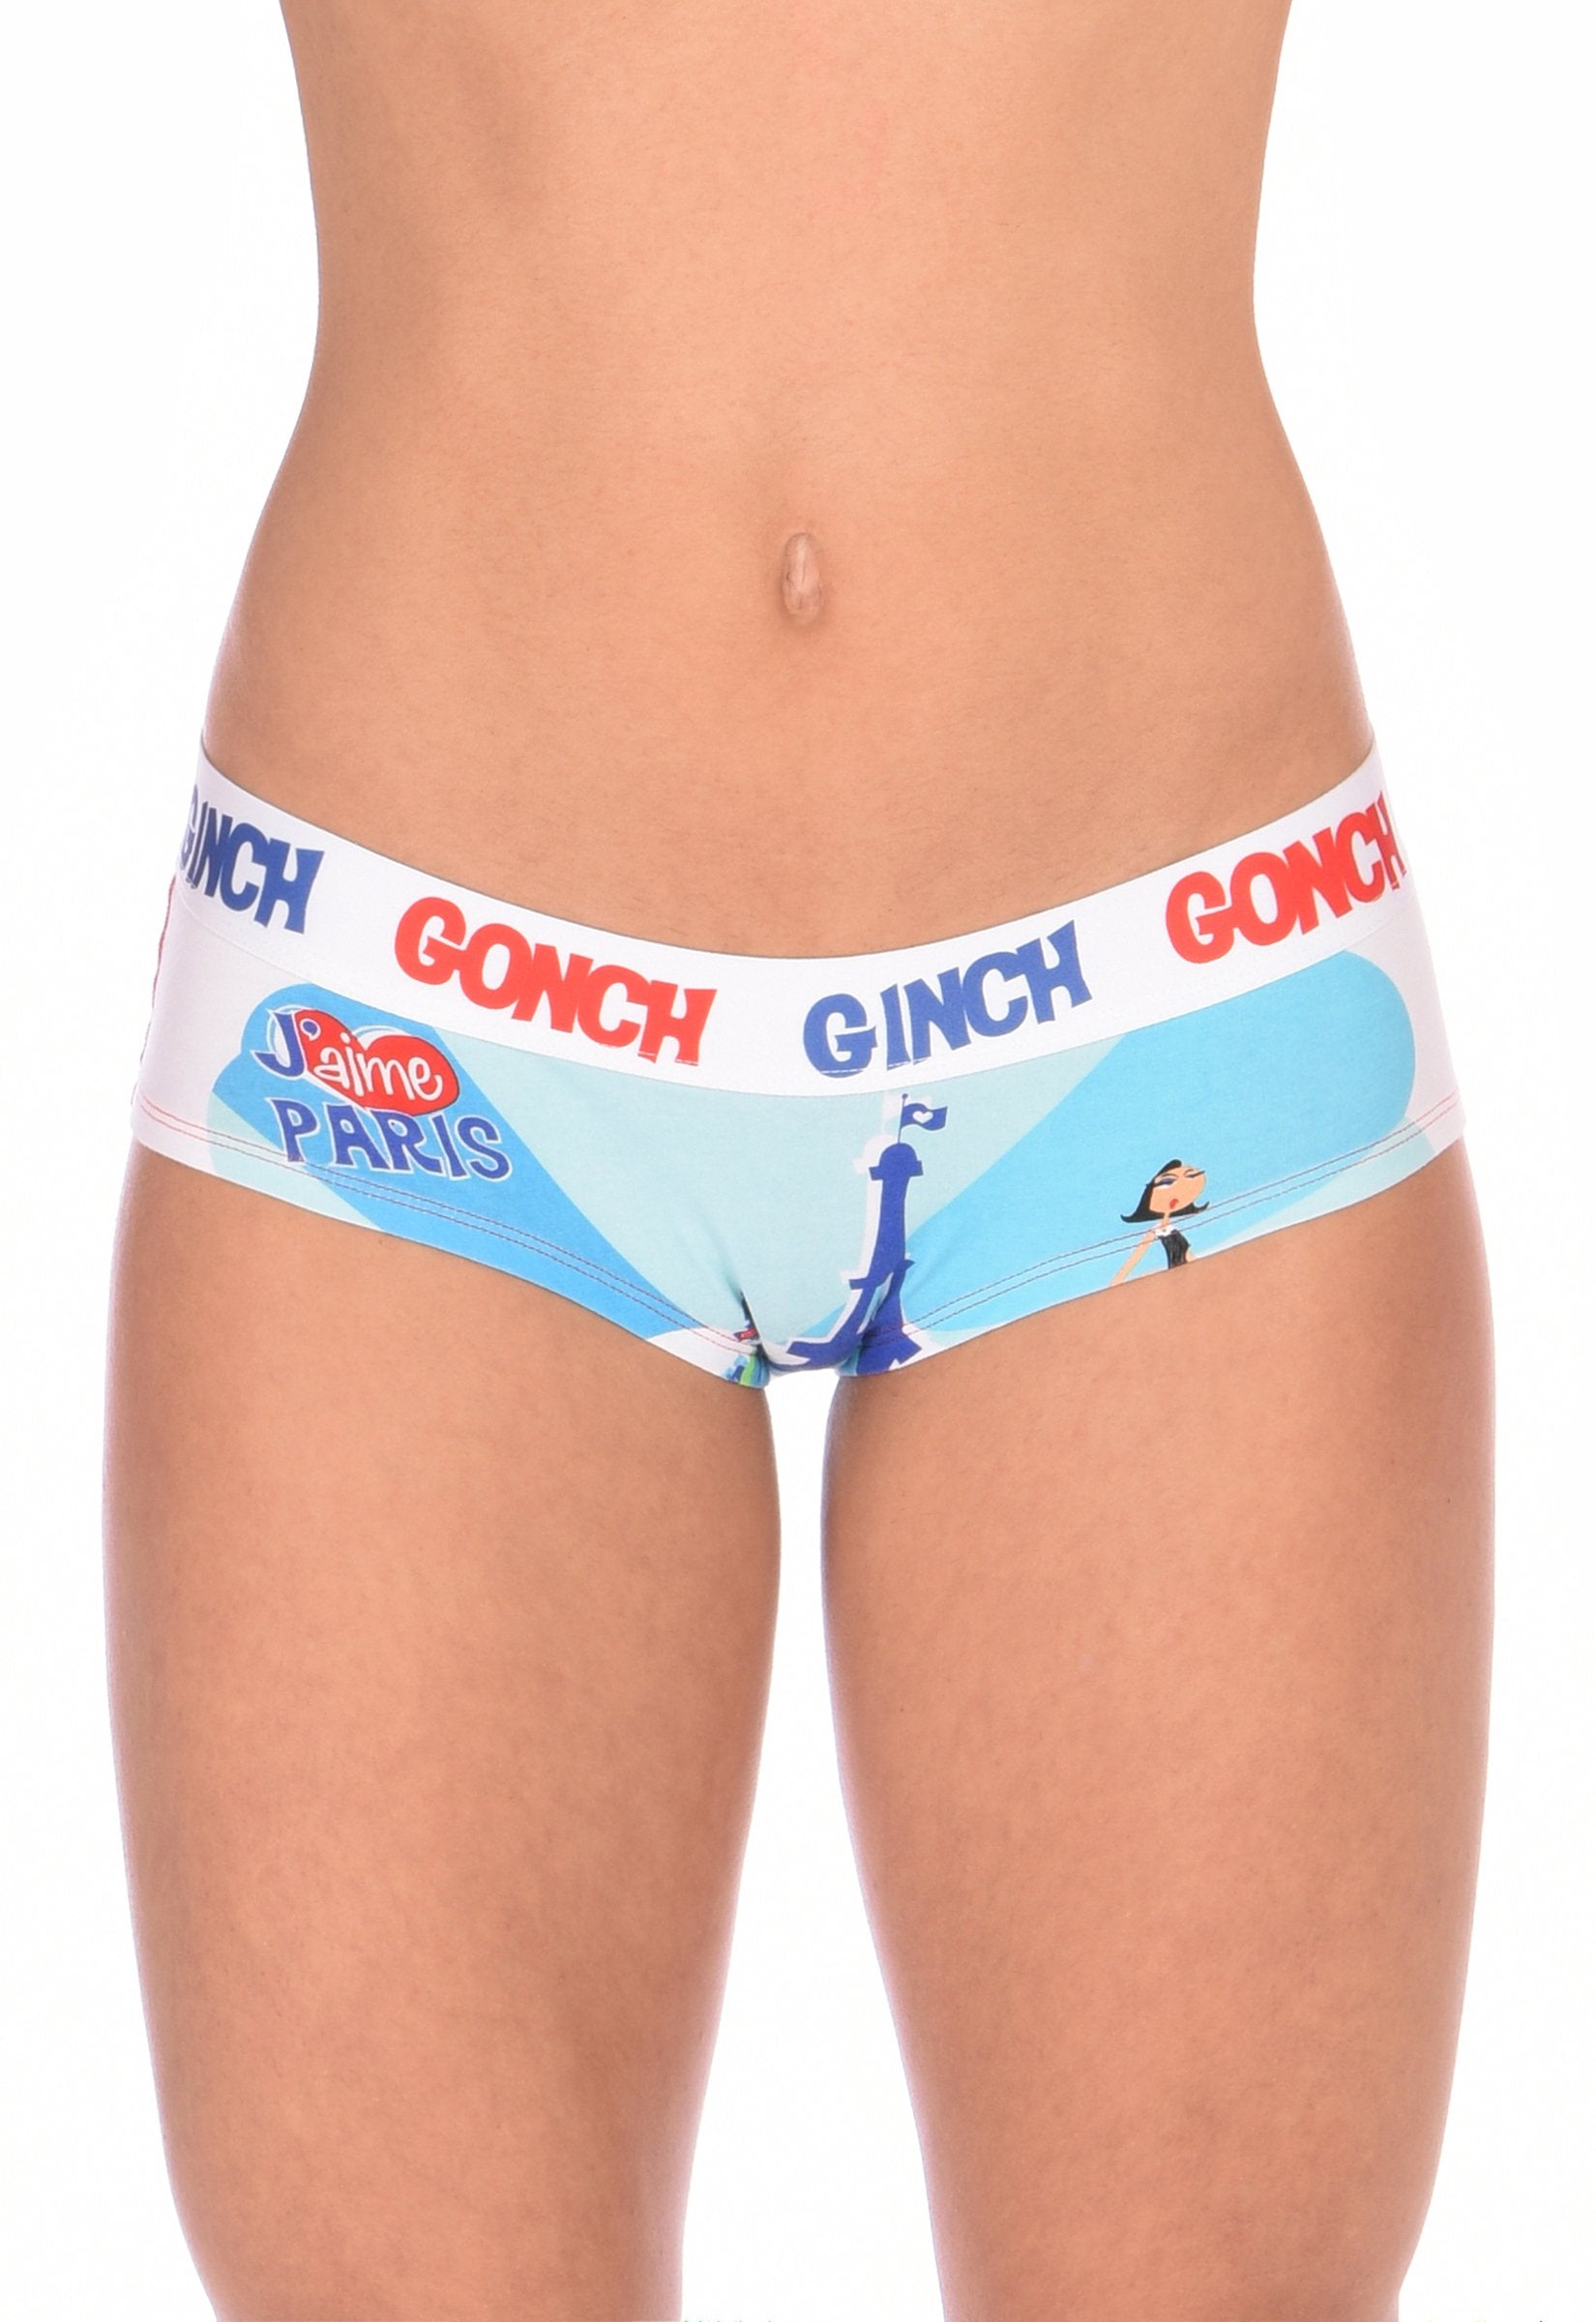 GG Ginch Gonch I Love Paris boy cut cheeky gogo -  women's Underwear white fabric with scene of eiffel tower and french person and white printed waistband front